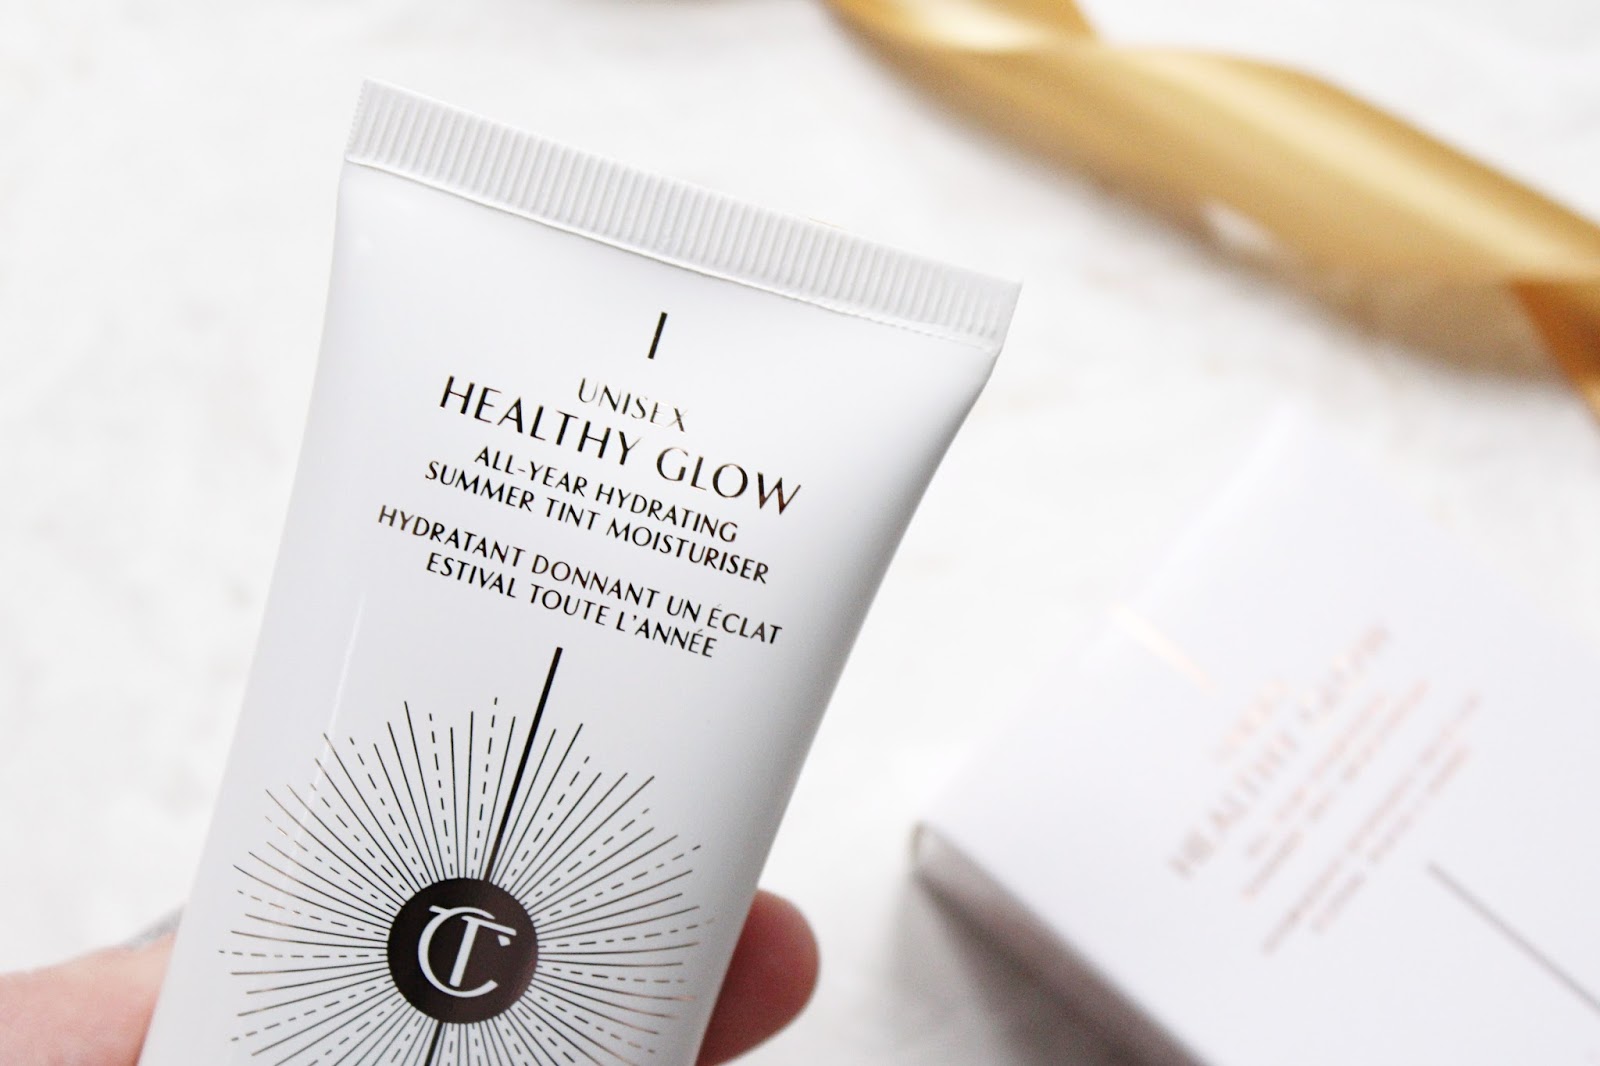 Charlotte Tilbury Unisex Healthy Glow Review 